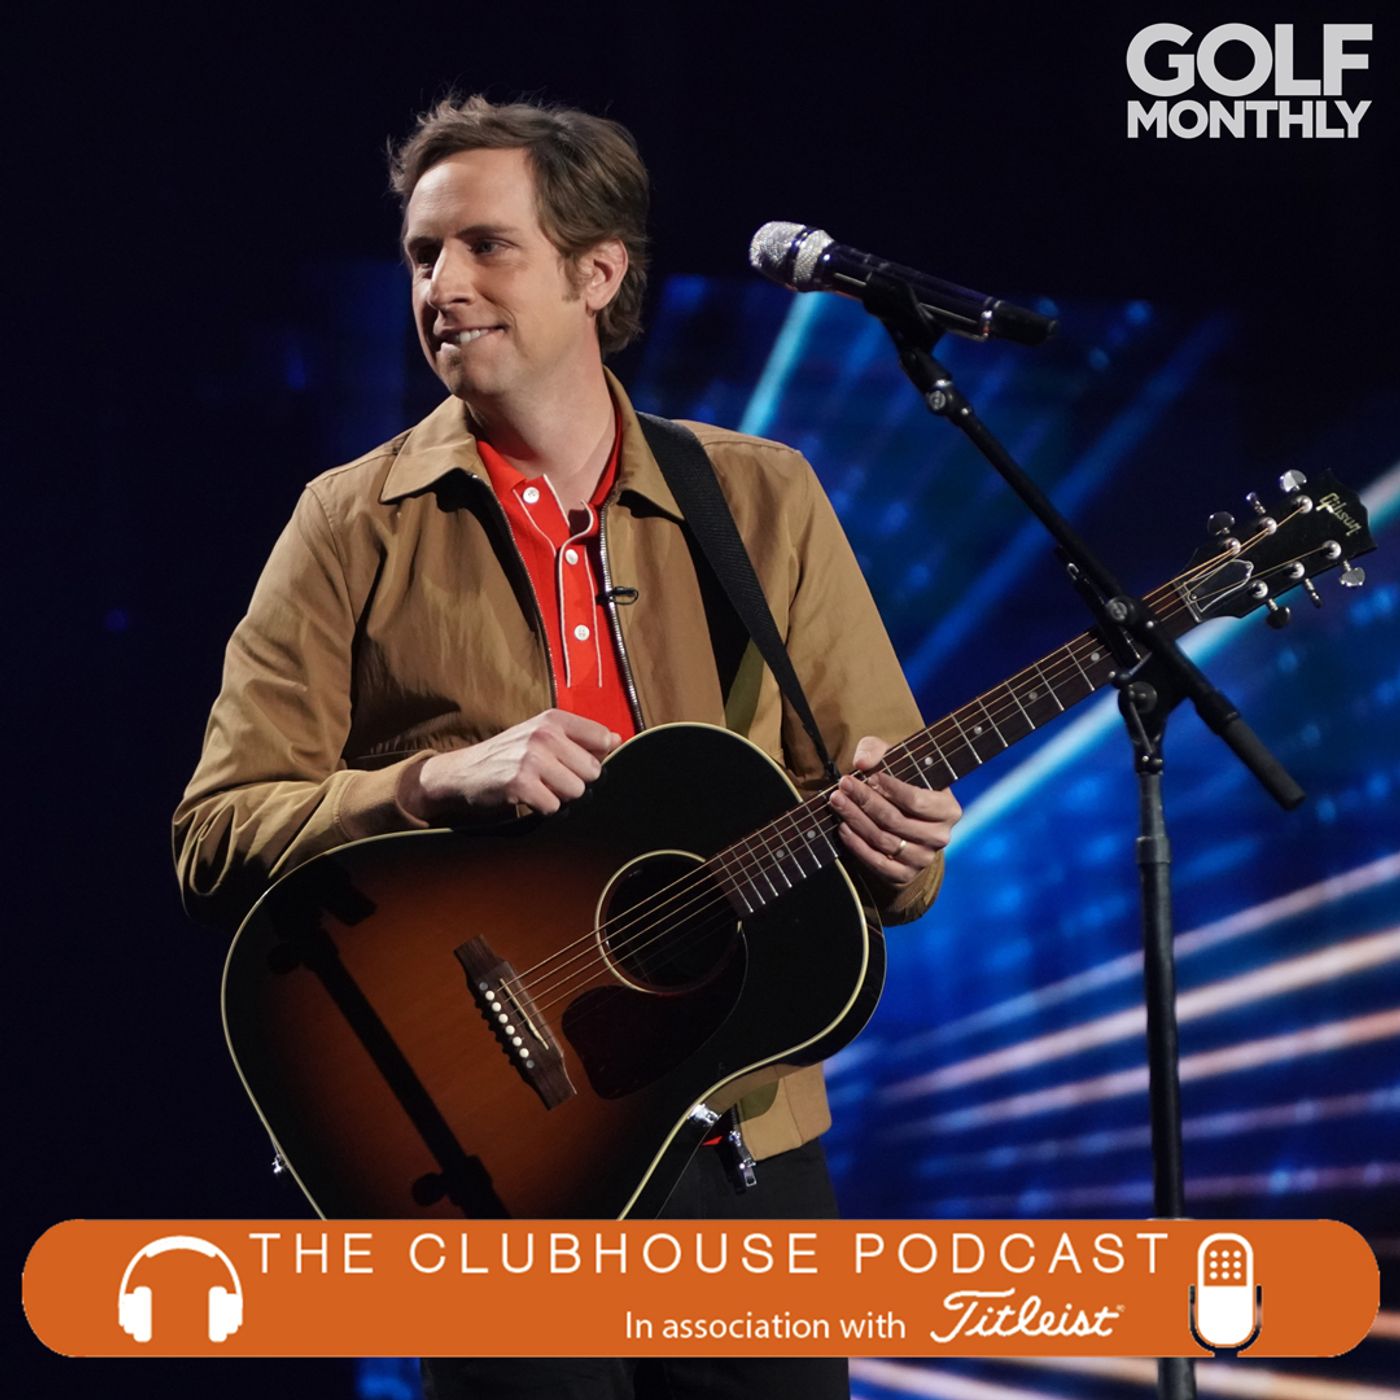 Musician Ben Rector on his love for the game, the pandemic and playing Augusta